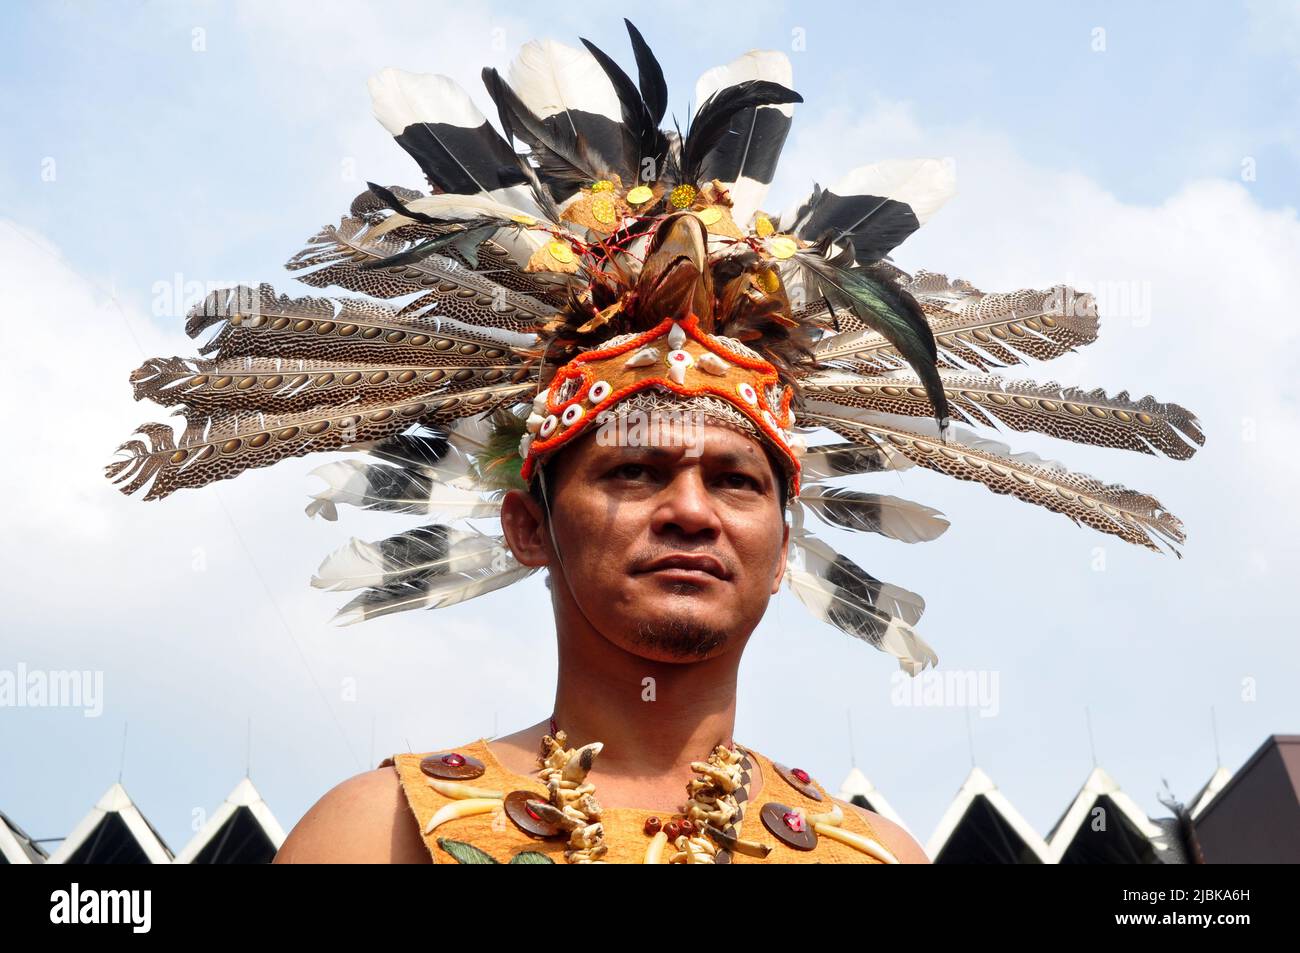 Jakarta, Indonesia - April 28, 2013 : Man from the Dayak tribe of Borneo, Indonesia, wears a headdress with eagle feathers and hornbill beak Stock Photo